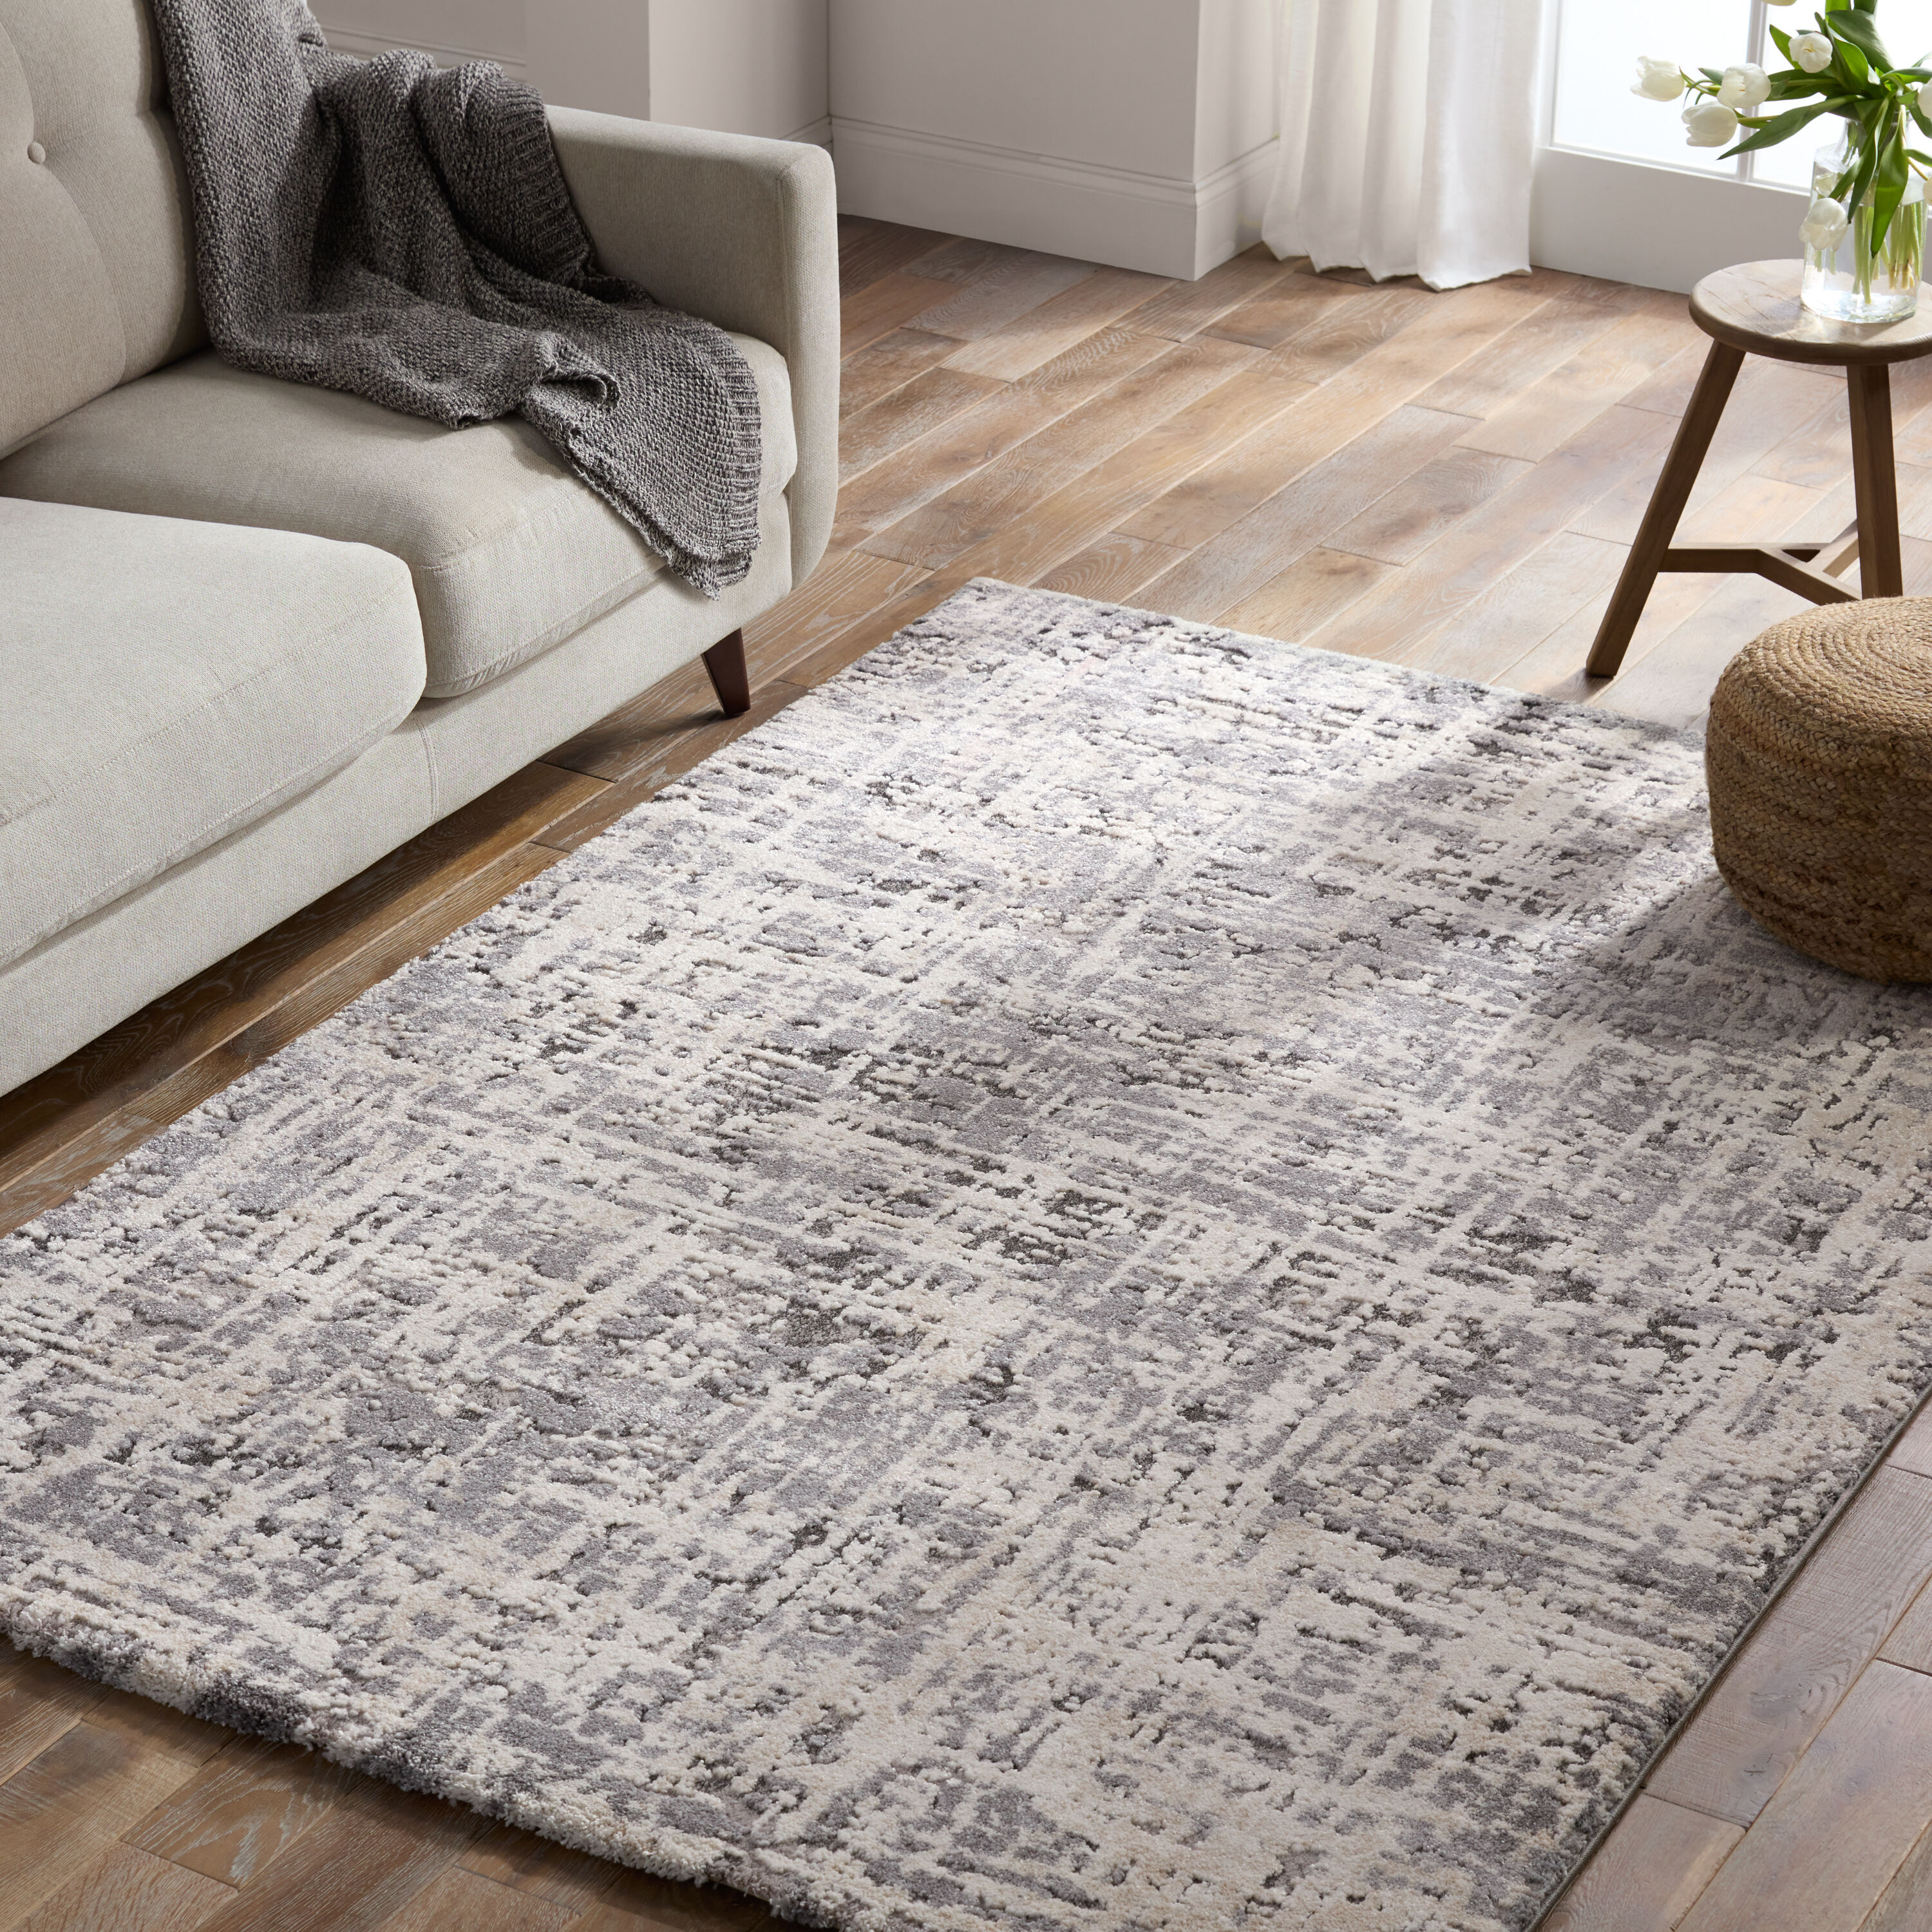 4' x 8' Runner Rugs with Rubber Backing, Indoor Outdoor Utility Carpet  Runner Rugs, Checkered Gray, Can Be Used as Aisle for The RV and Boat,  Laundry